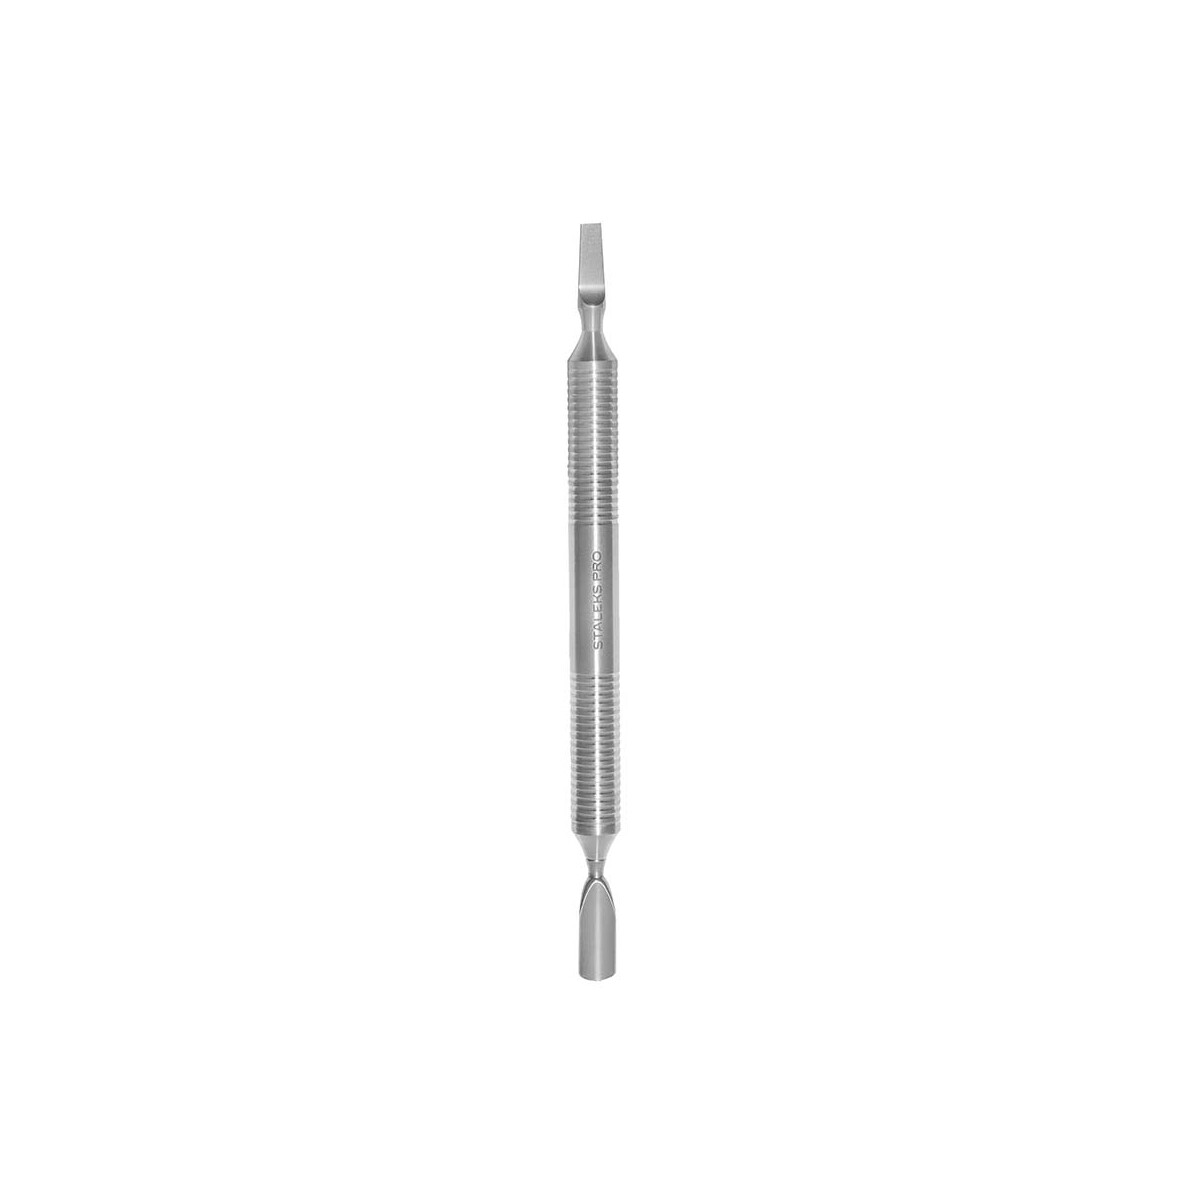 Hollow manicure pusher EXPERT 100 TYPE 5 (rounded pusher...